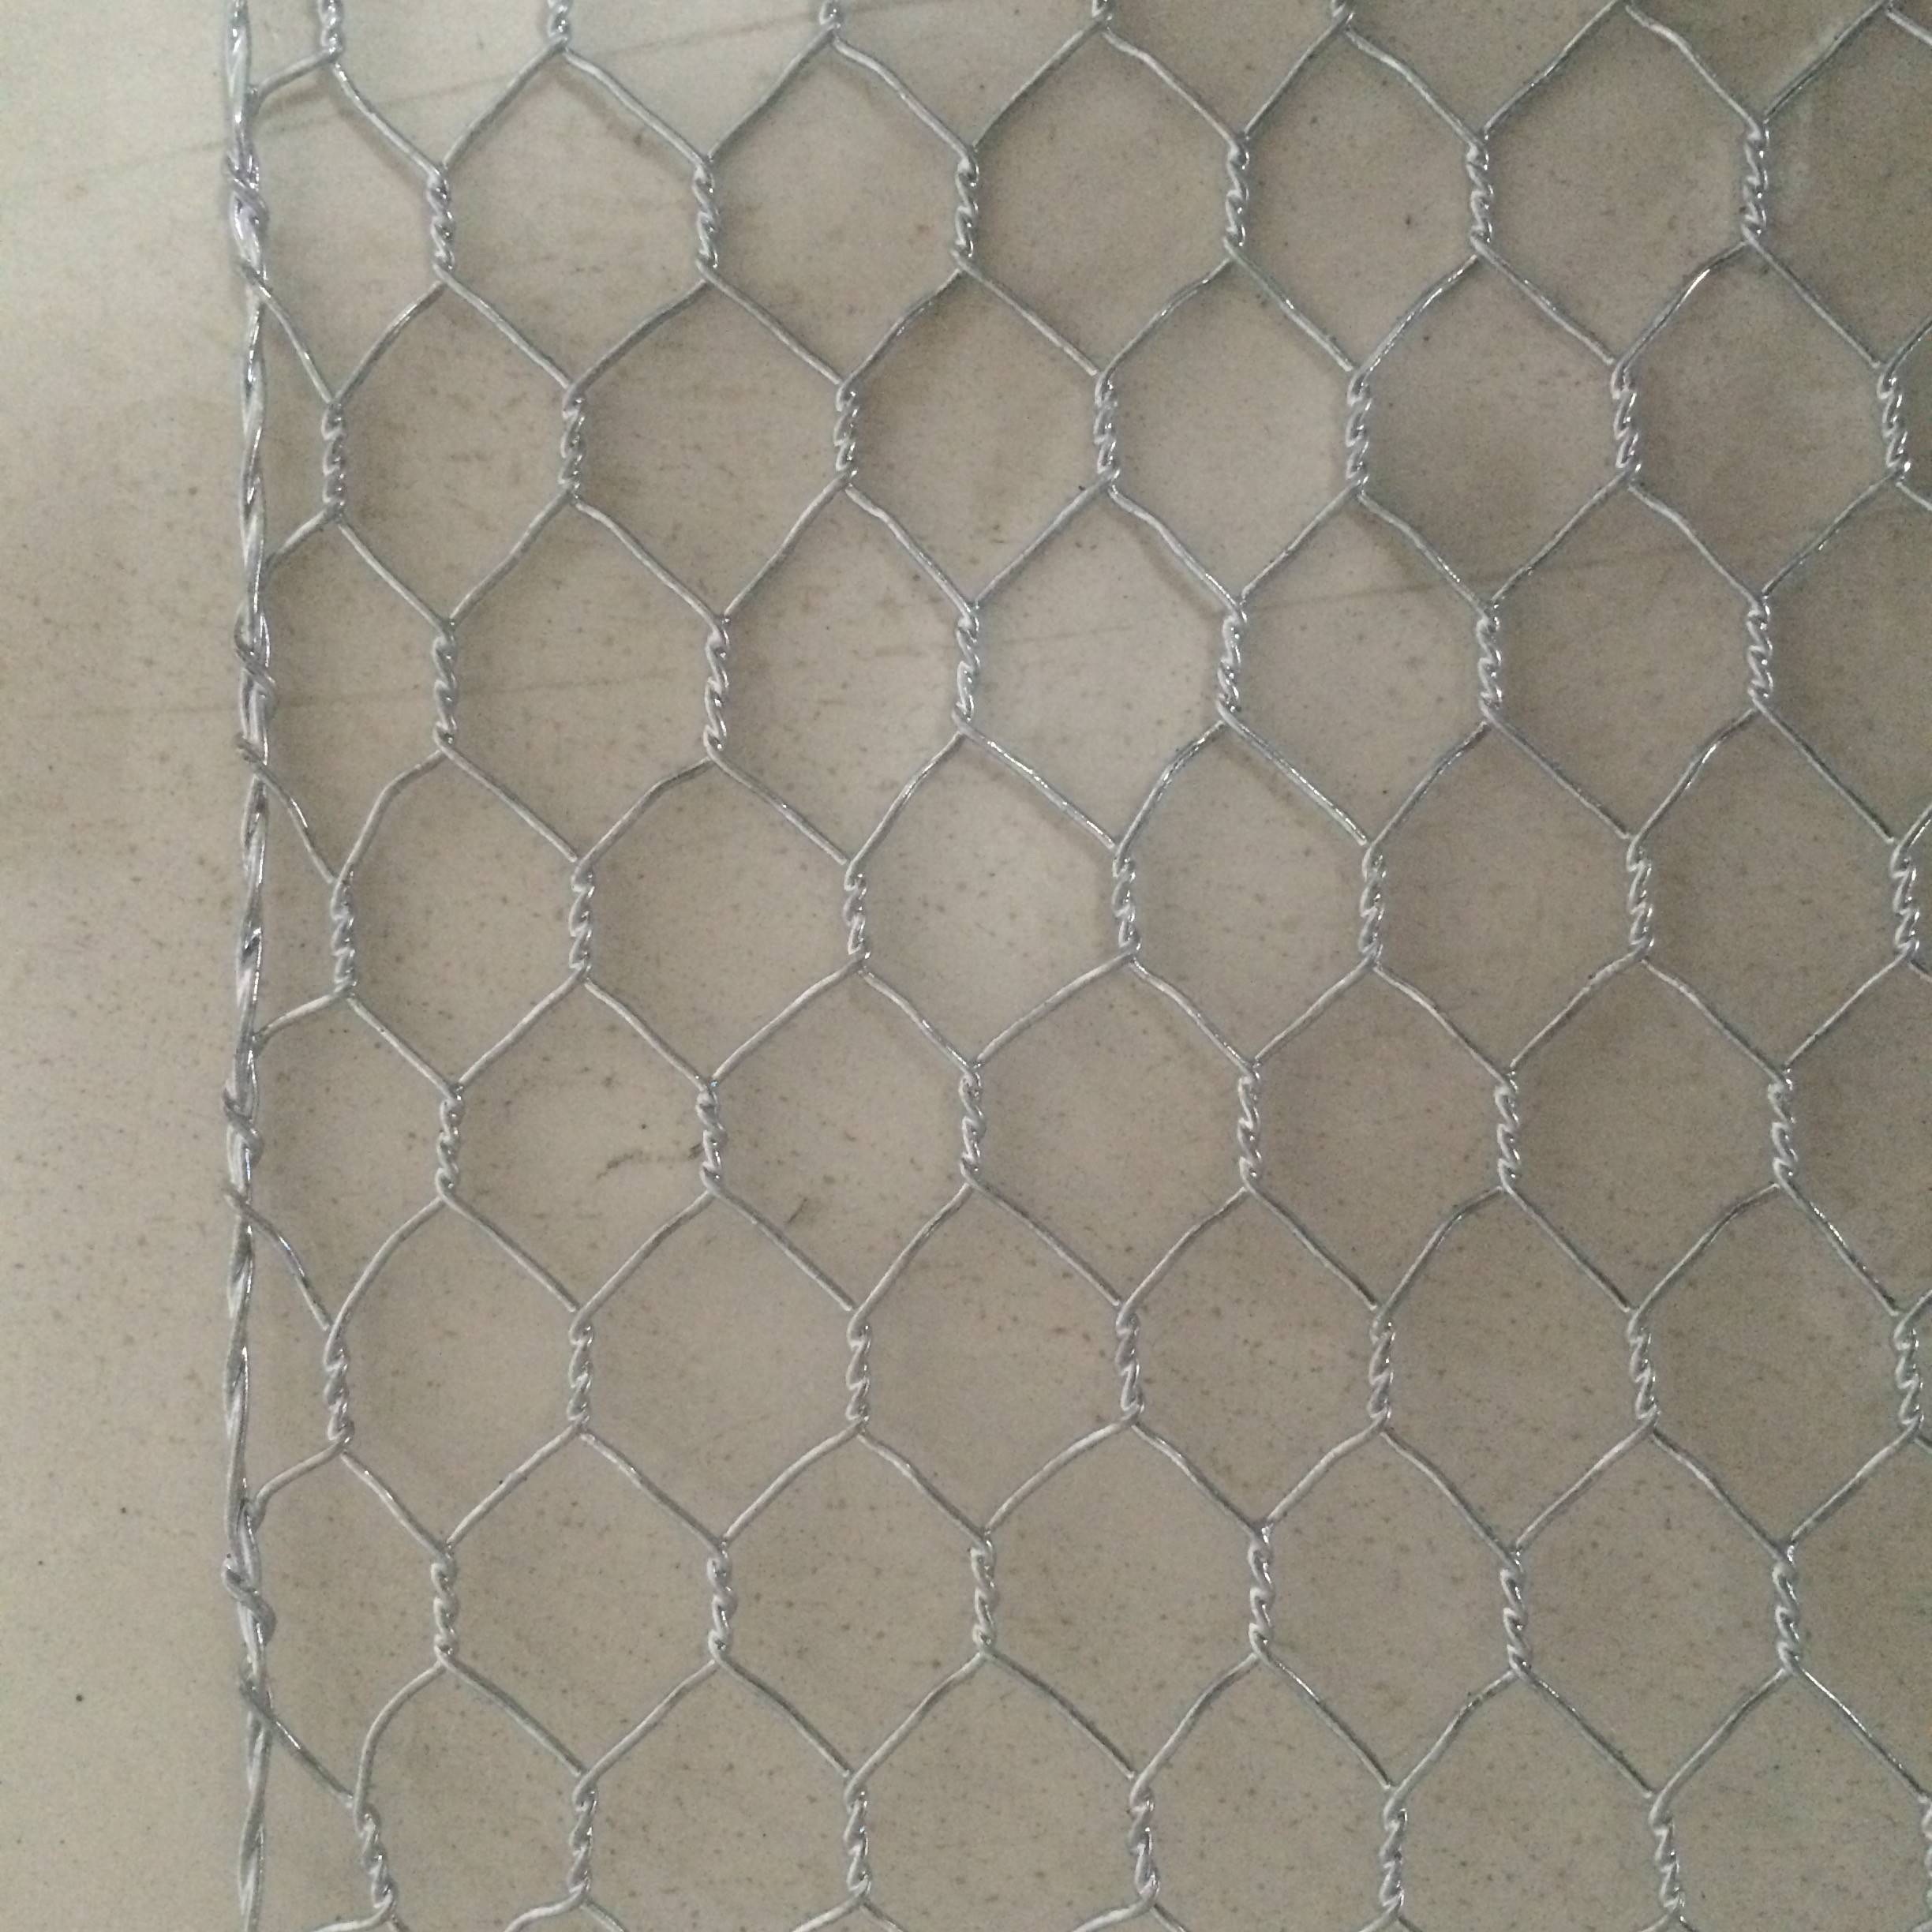 16 Gauge Galvanized Woven Wire Mesh Fencing For Building Paddle / Tennis Courts